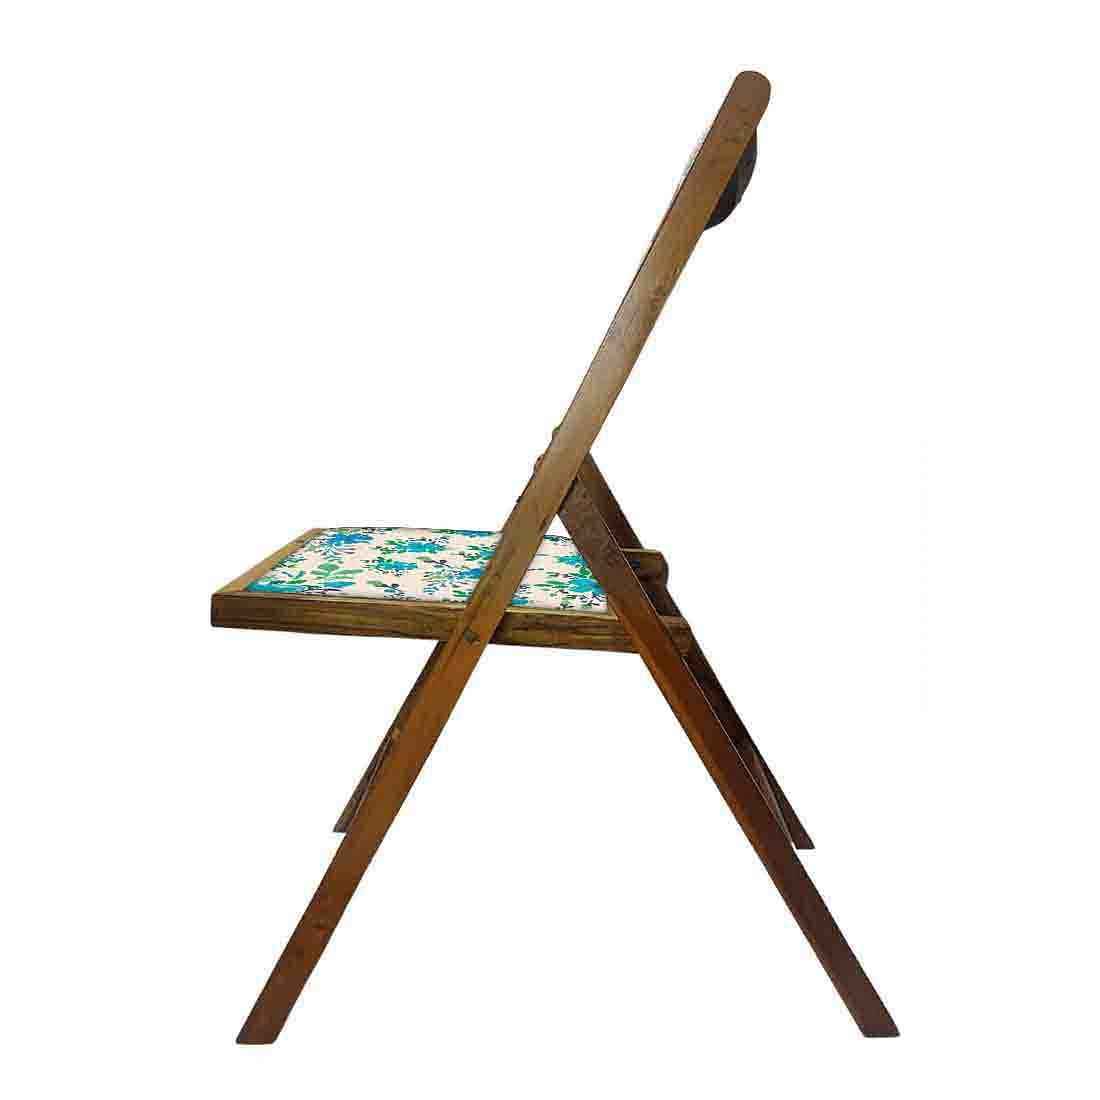 Nutcase Folding Chair Wooden For Home Dining - Blue Floral Nutcase